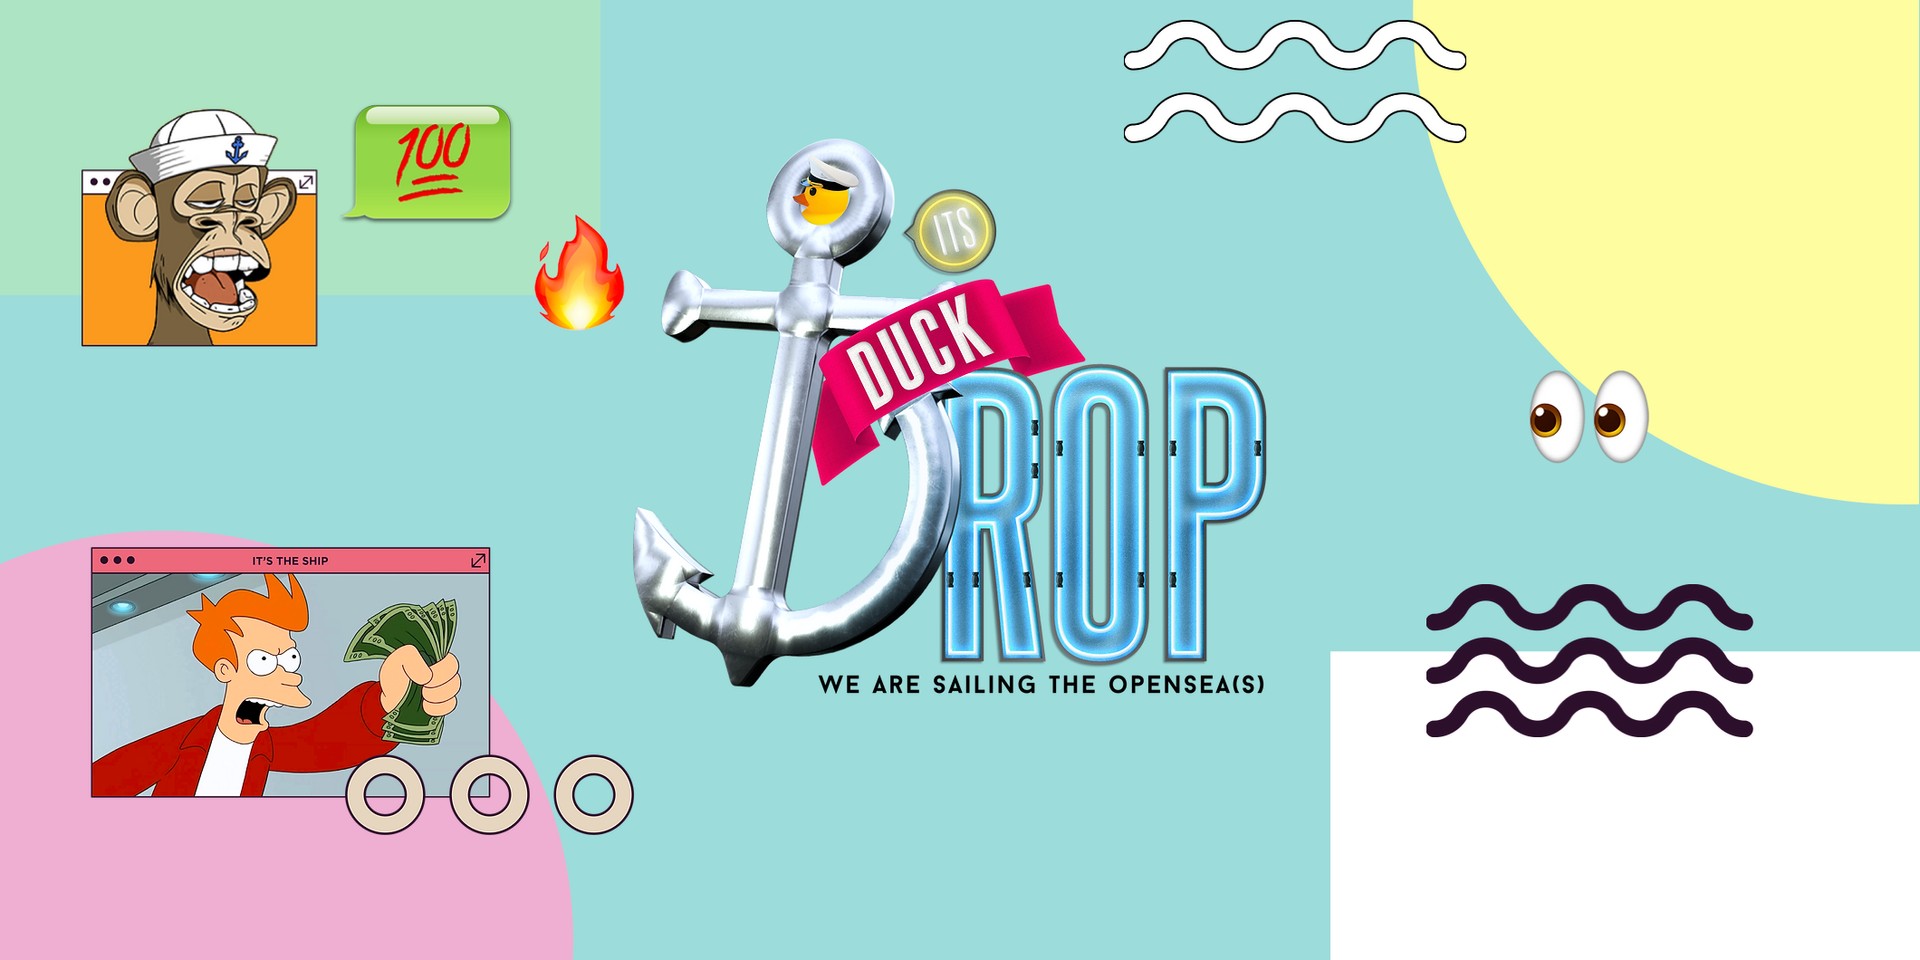 IT’S THE SHIP is sailing out into the Metaverse with first NFT collection, DuckDrop